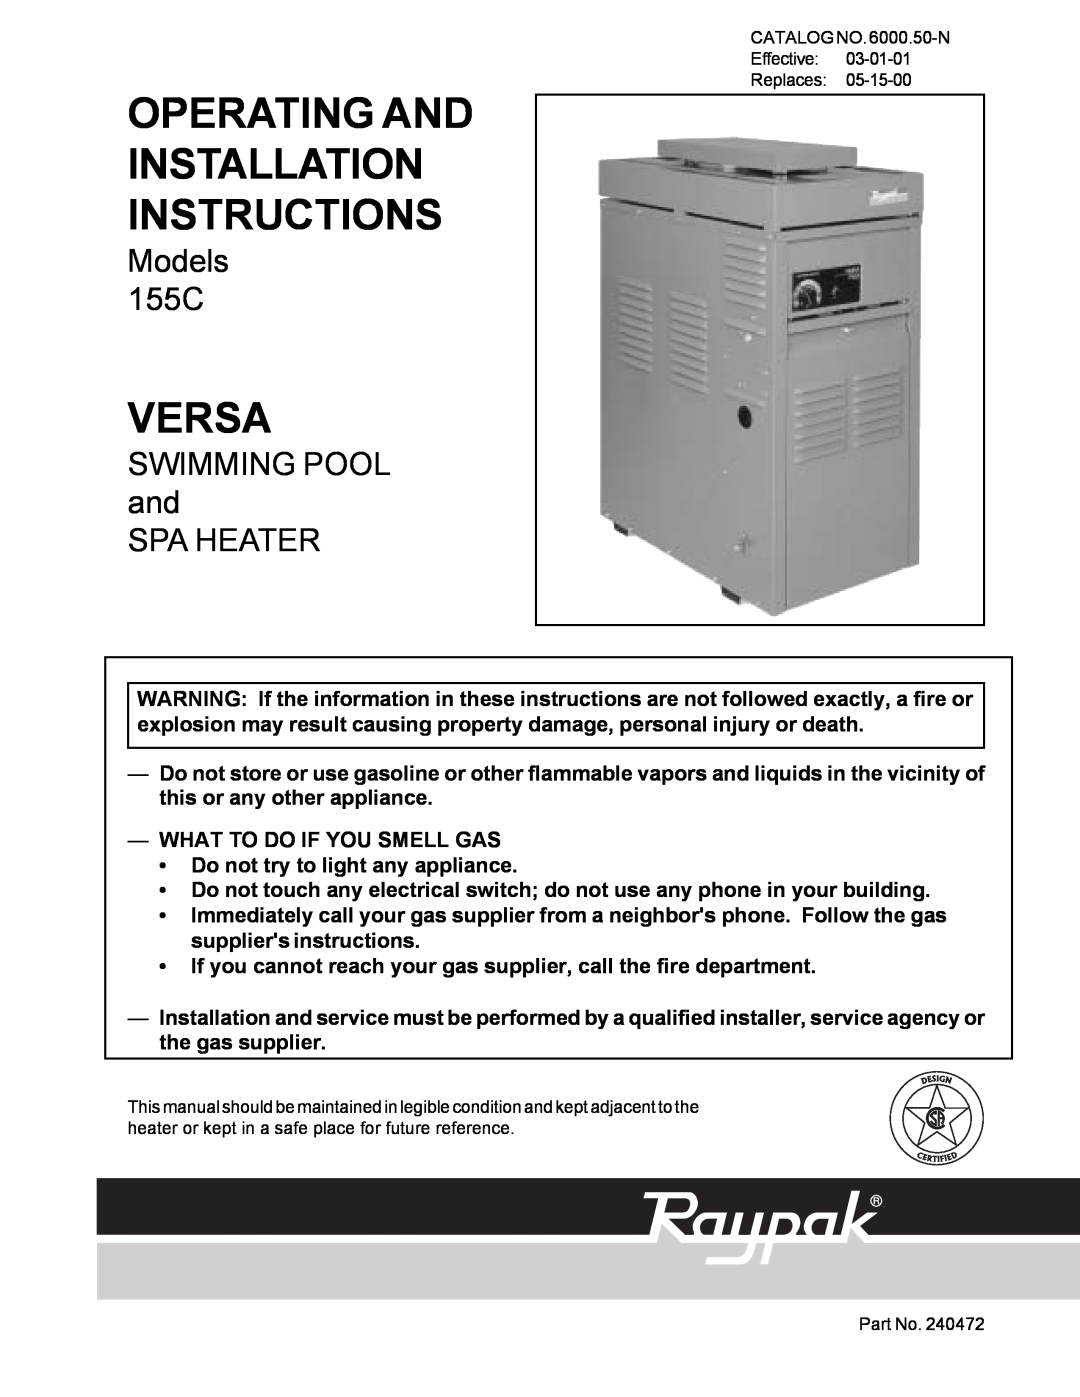 Raypak installation instructions Operating And Installation Instructions, Versa, Models 155C 